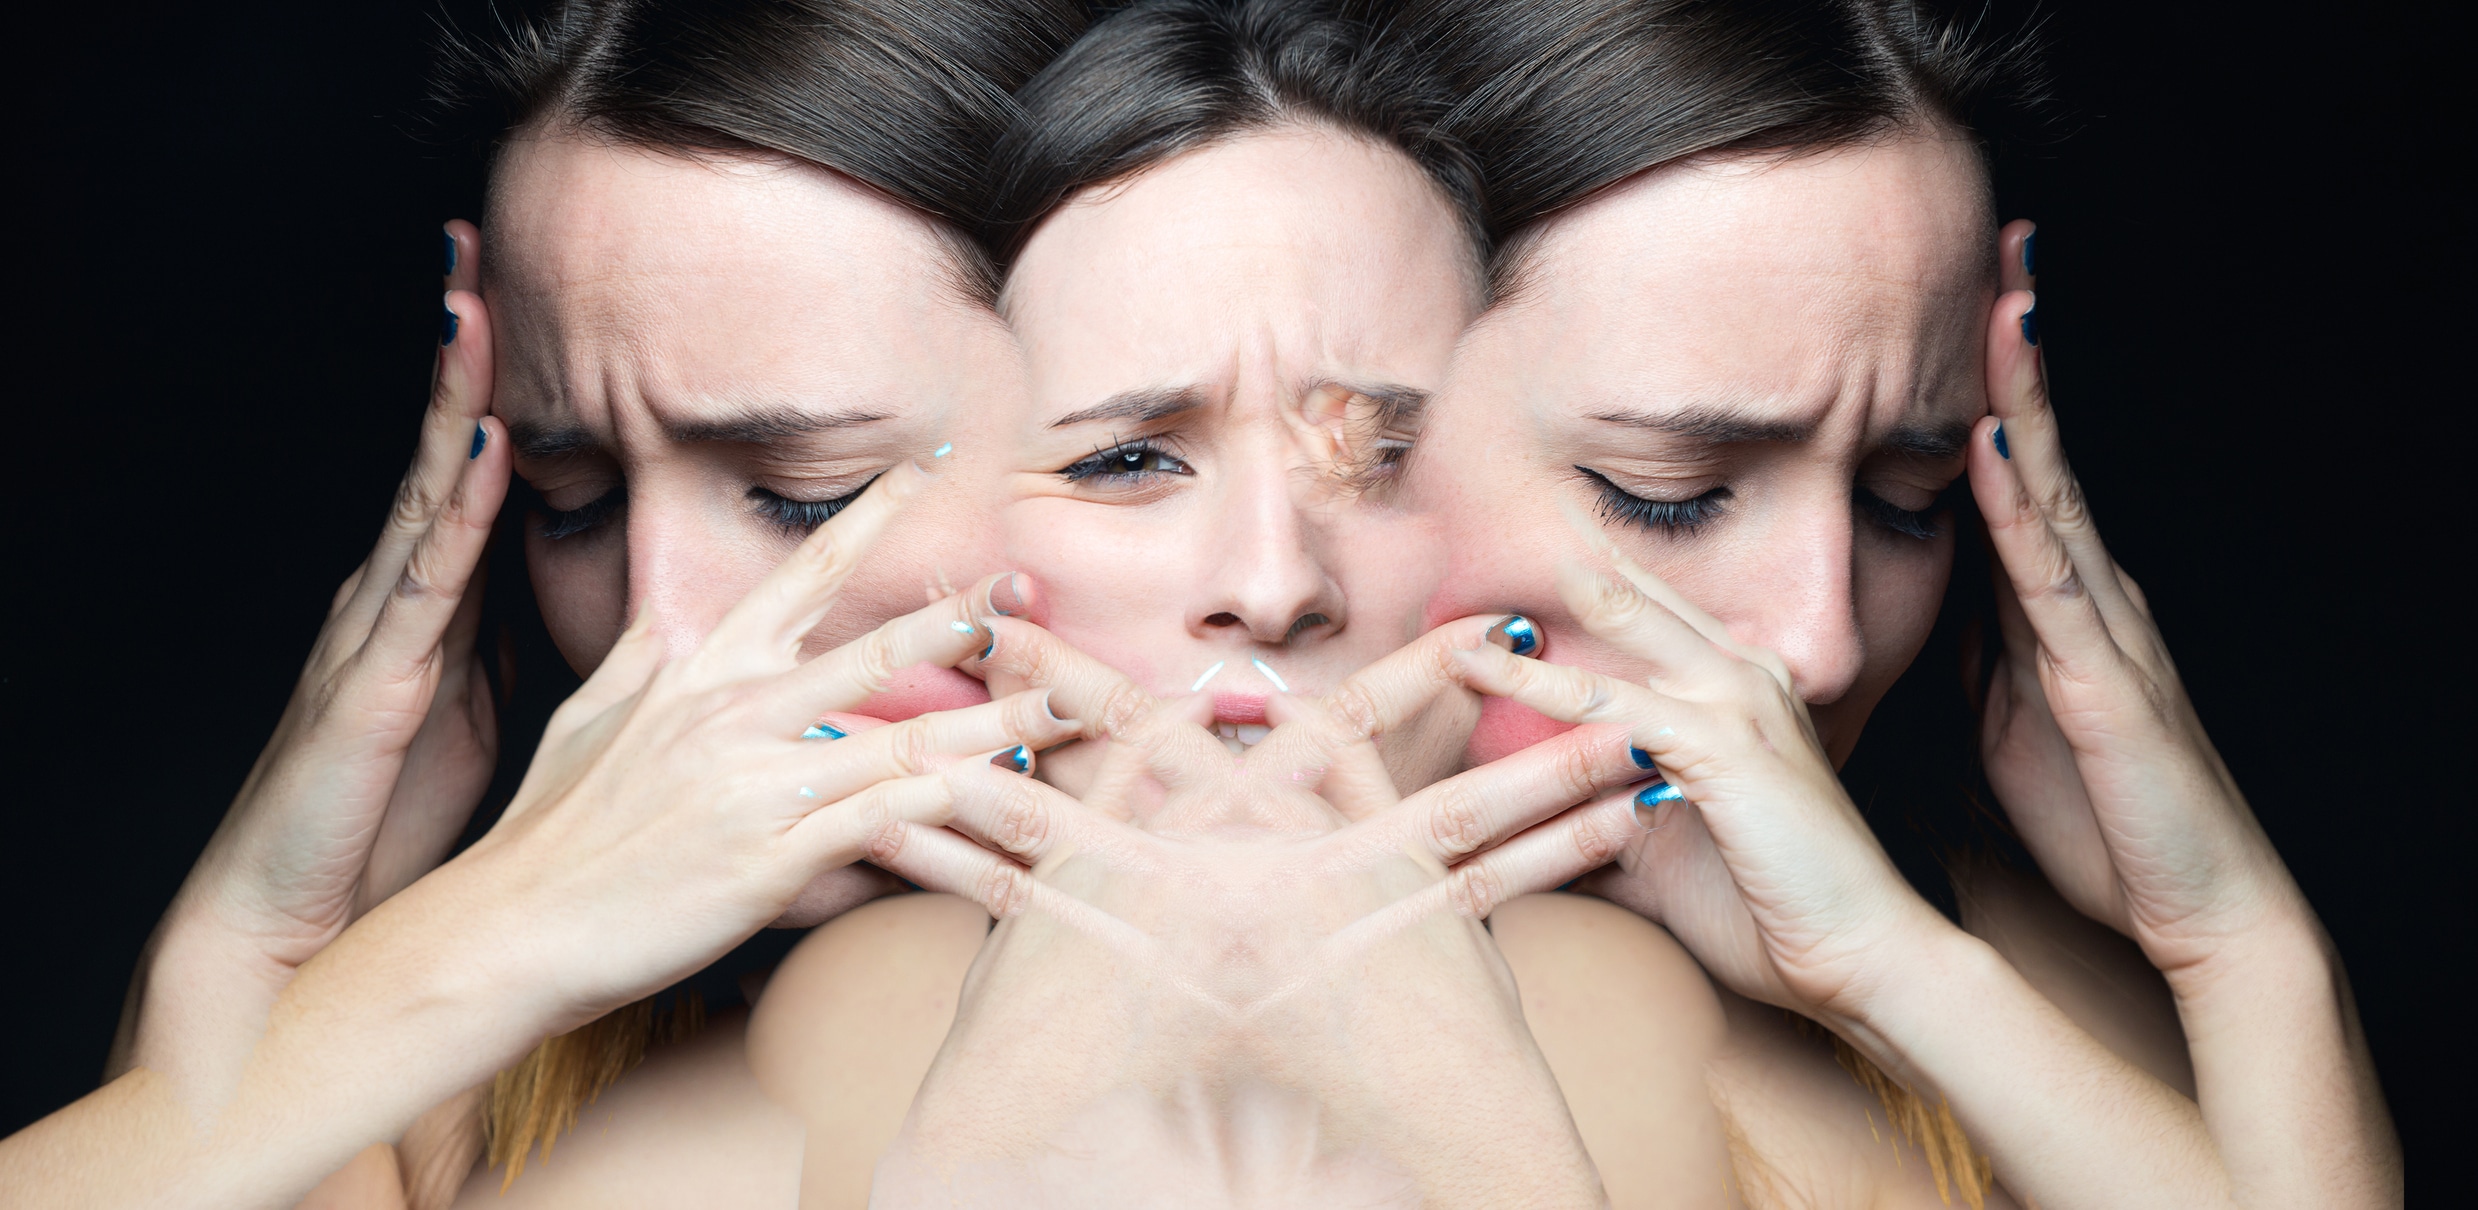 How Do I Know if I Have Bipolar Disorder? - The Meadows Outpatient